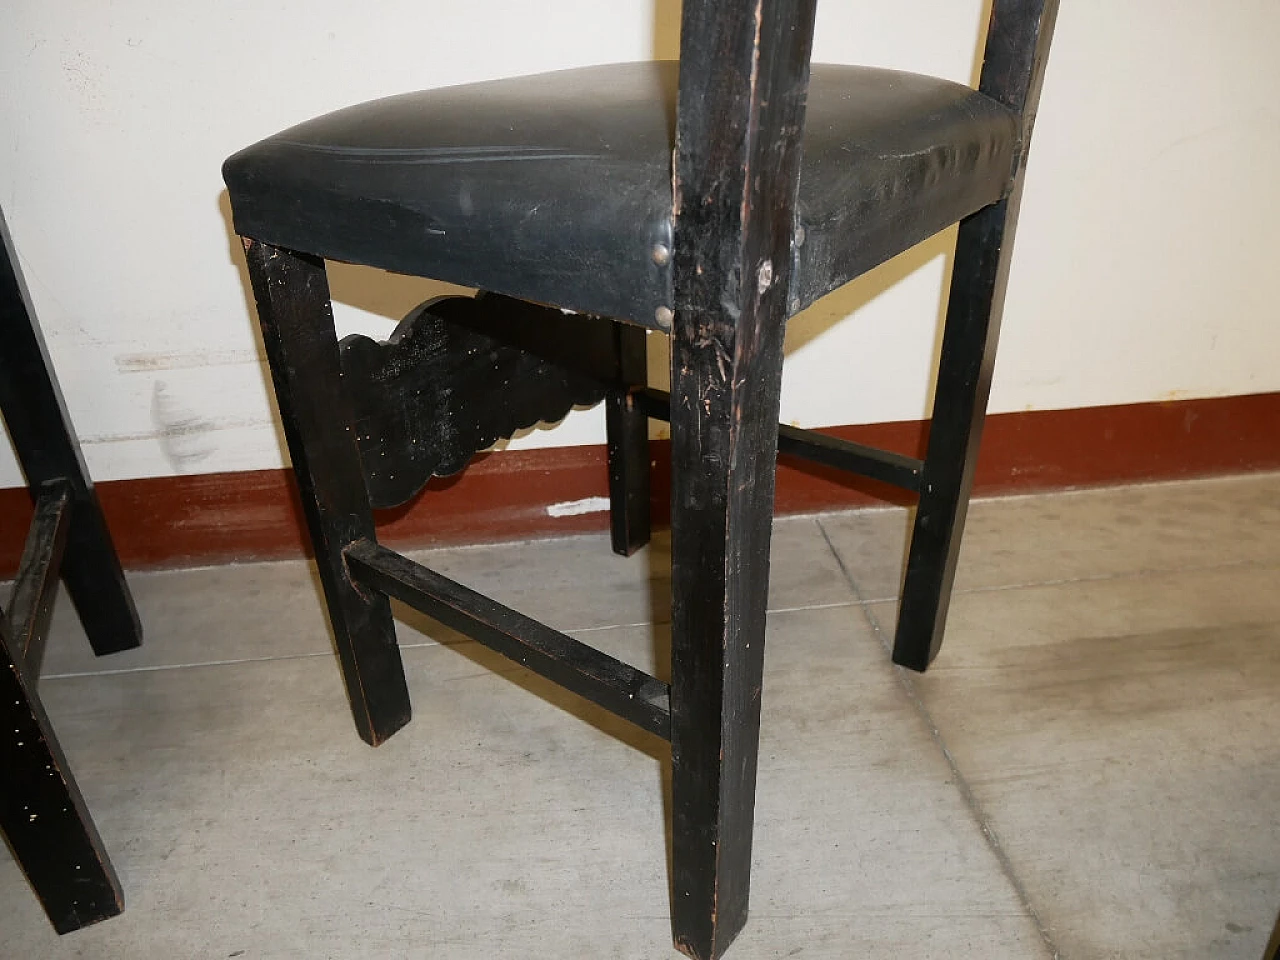 6 Renaissance-style chairs in black-stained wood, 1930s 1375420